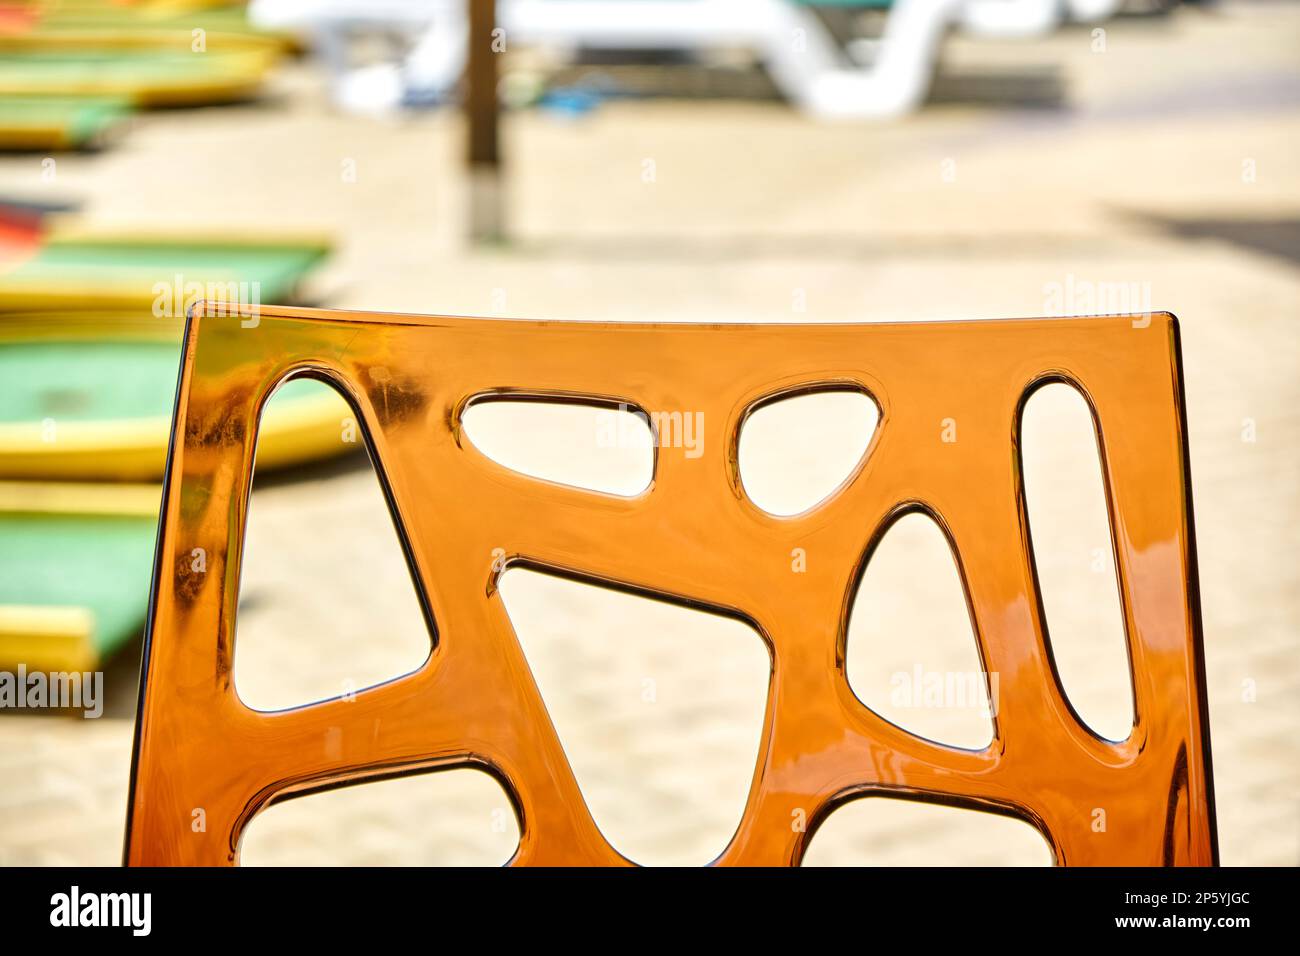 Back of chair made of transparent acrylic glass on blurred background. Place to sit in touristic street cafe near water park on sunny day closeup Stock Photo